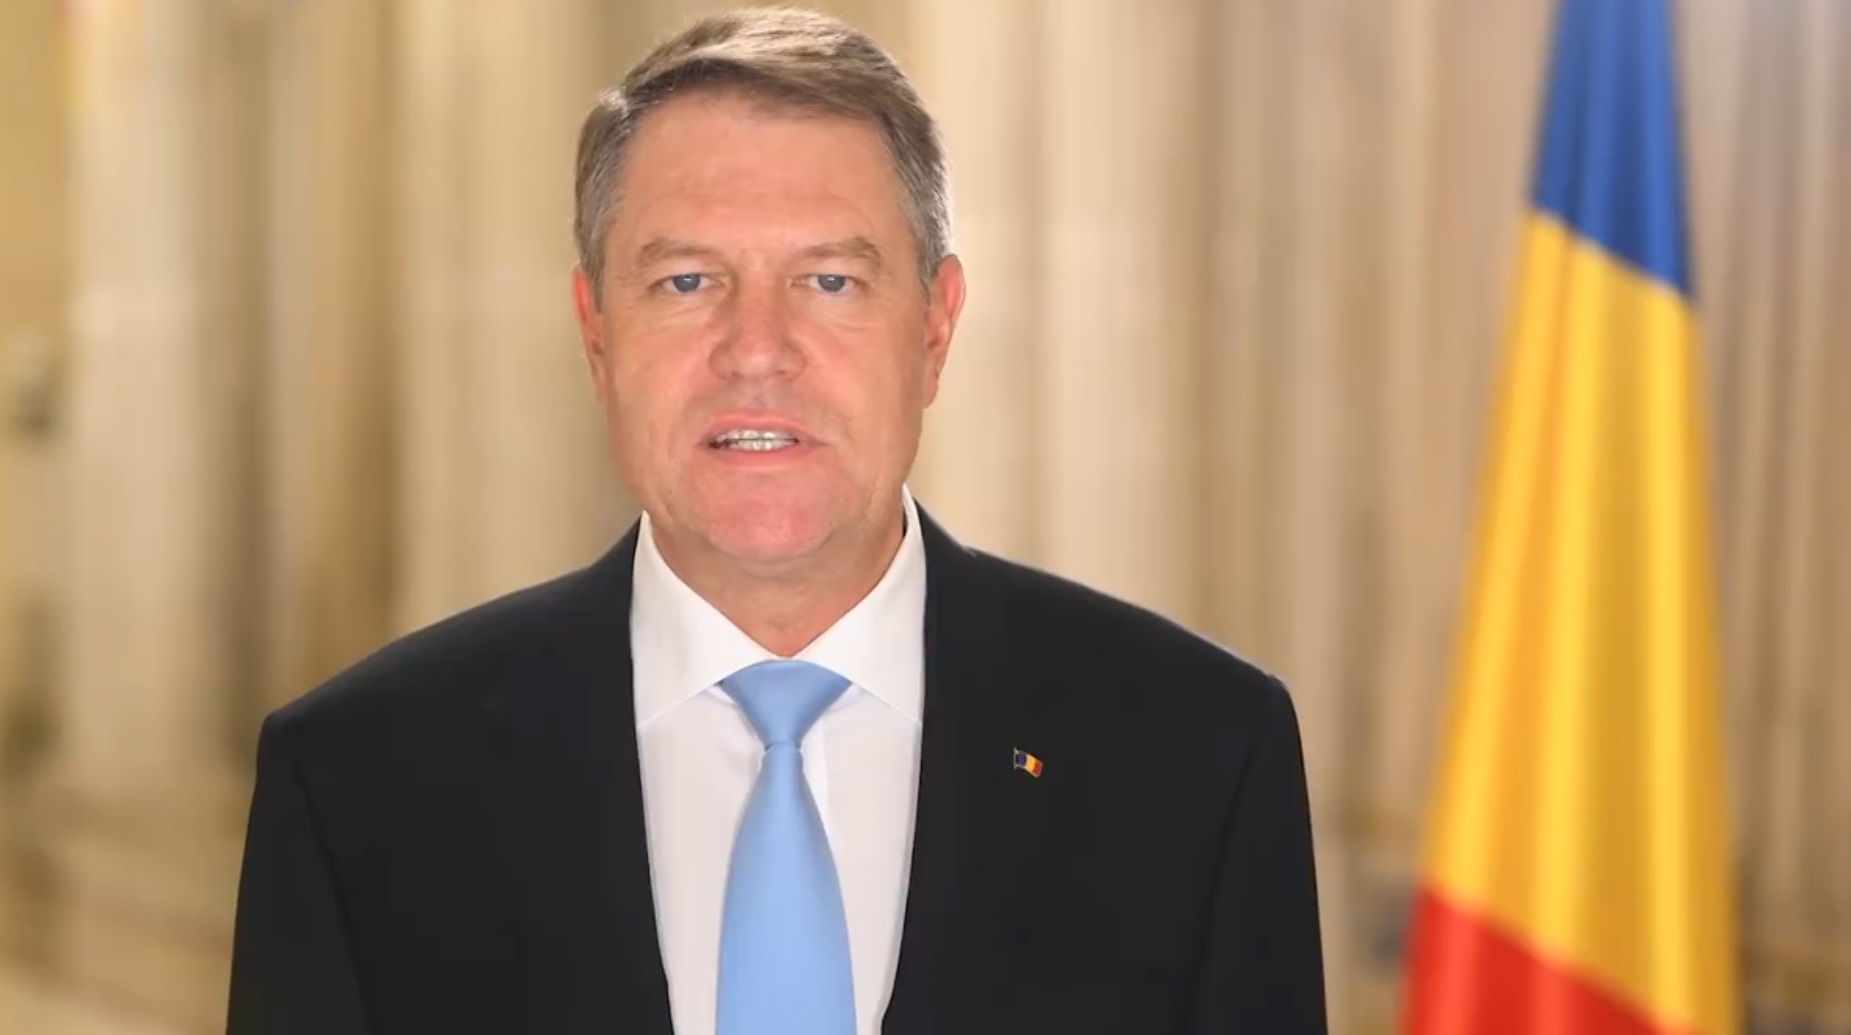 President Iohannis: Romania not ready to take over the presidency of the Council of the European Union